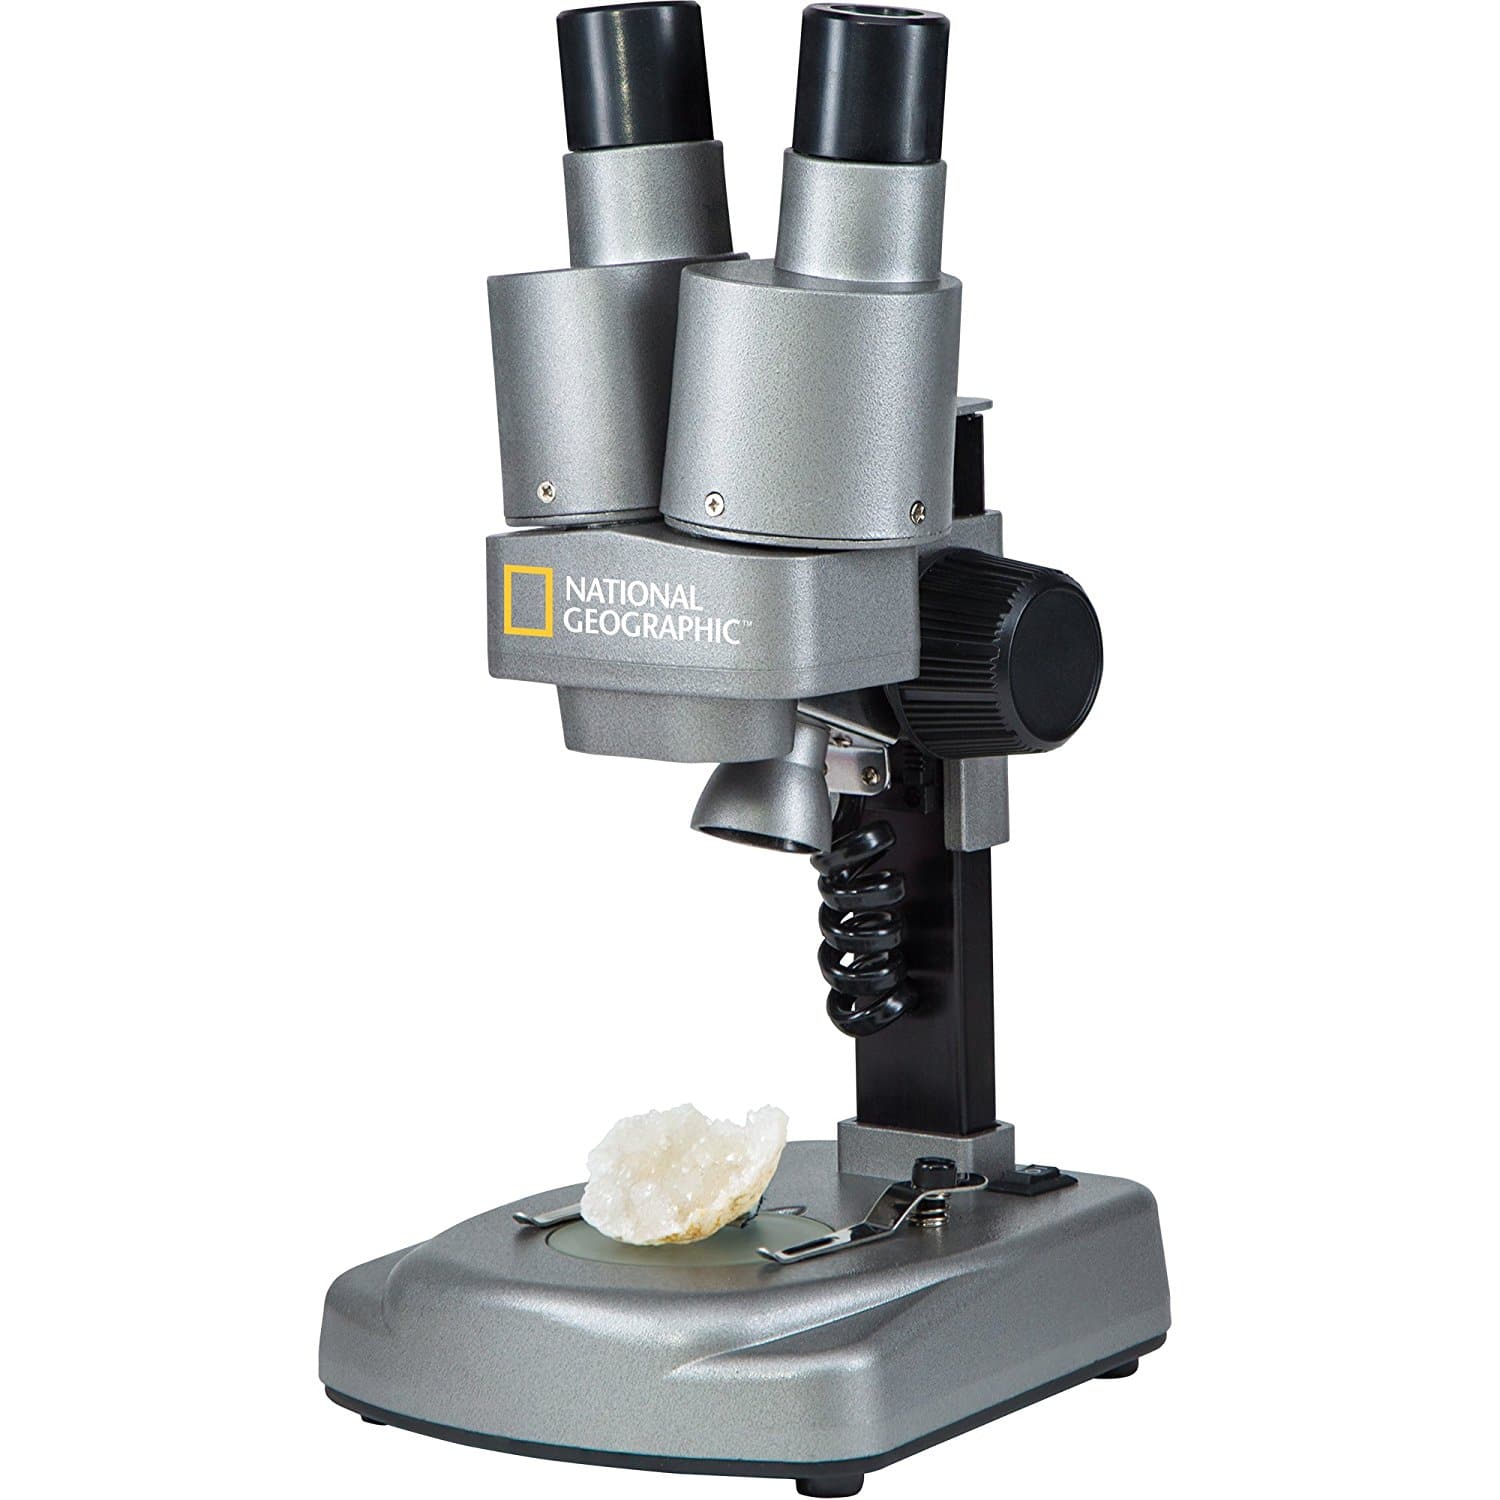 LIGHTNING DEAL ALERT! Dual Microscope Science Lab – Over 50 Accessories – 32% off!